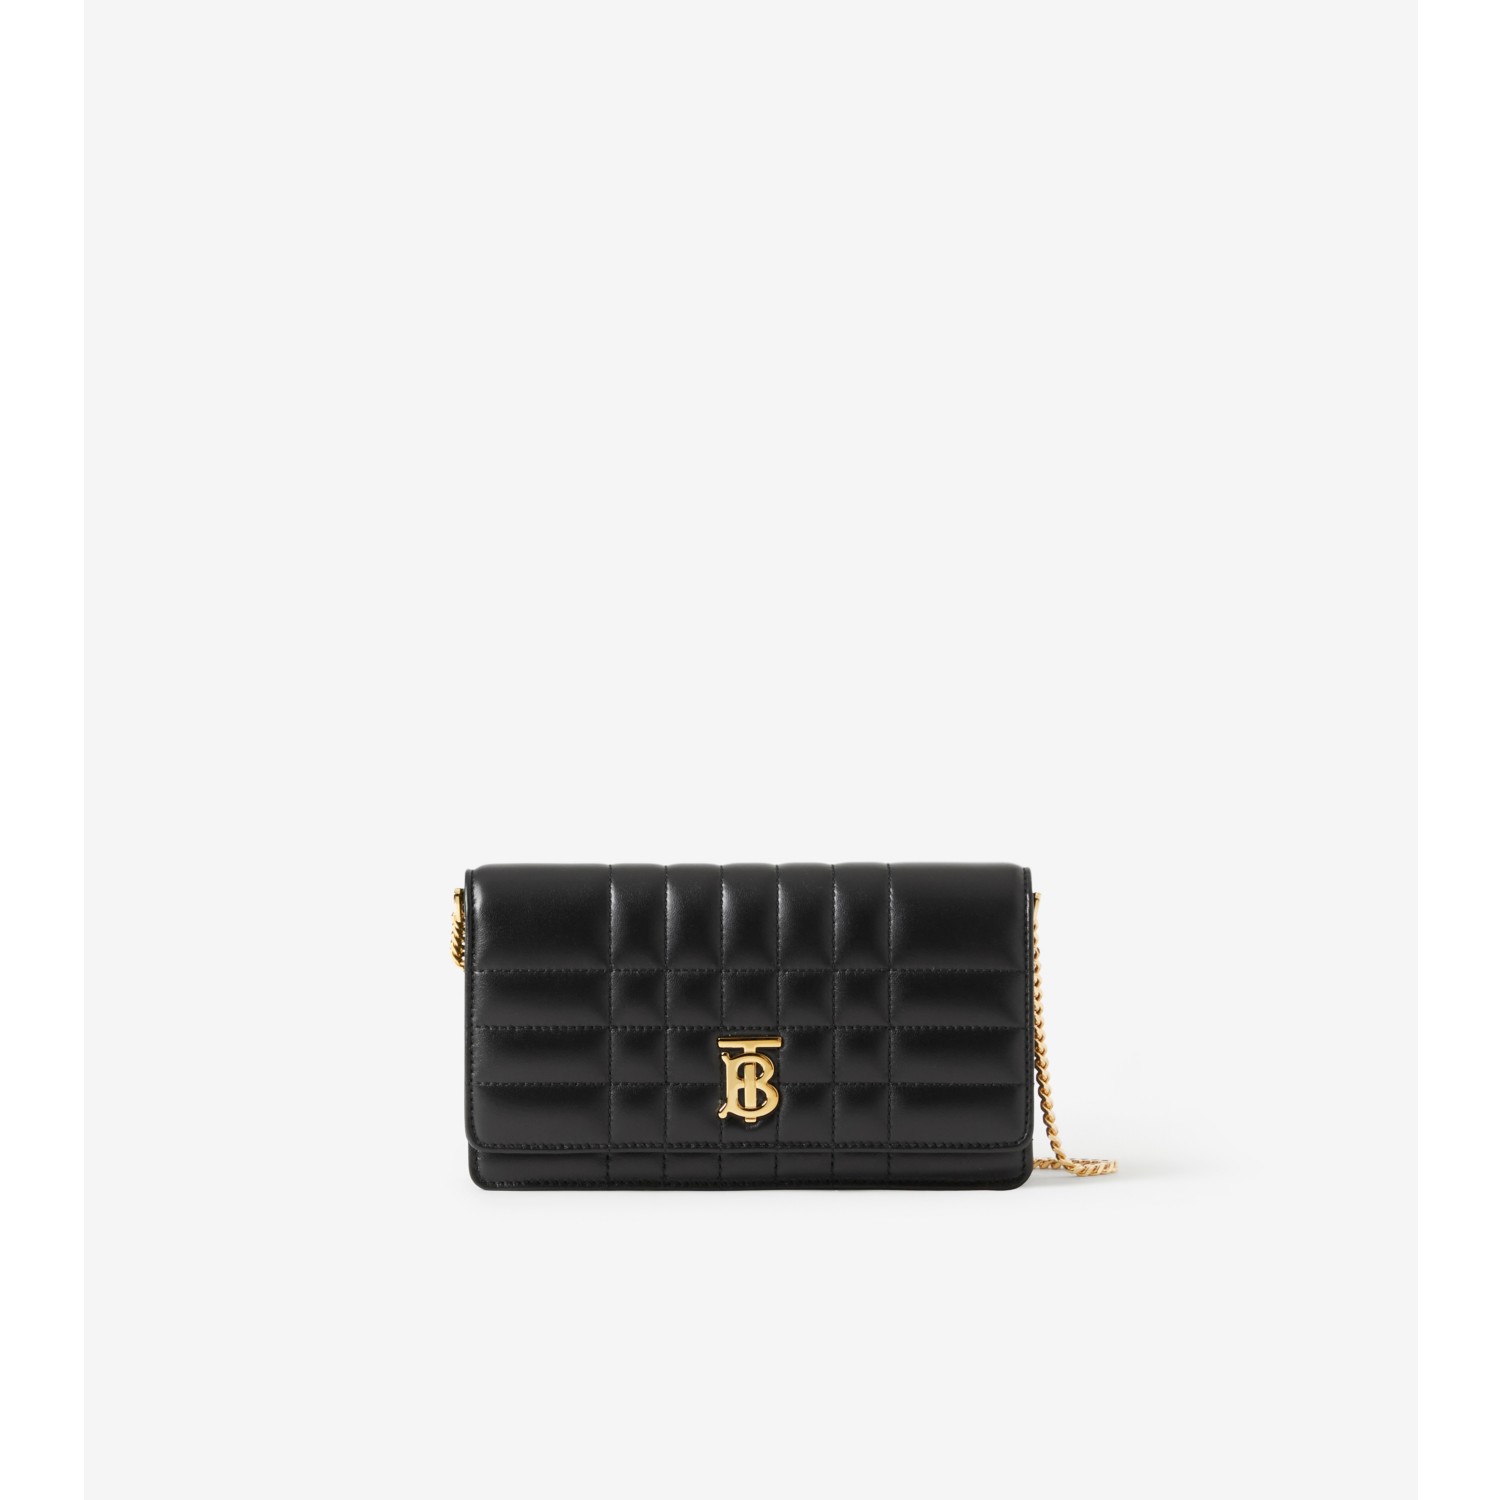 BURBERRY Lola Small Leather Shoulder Bag